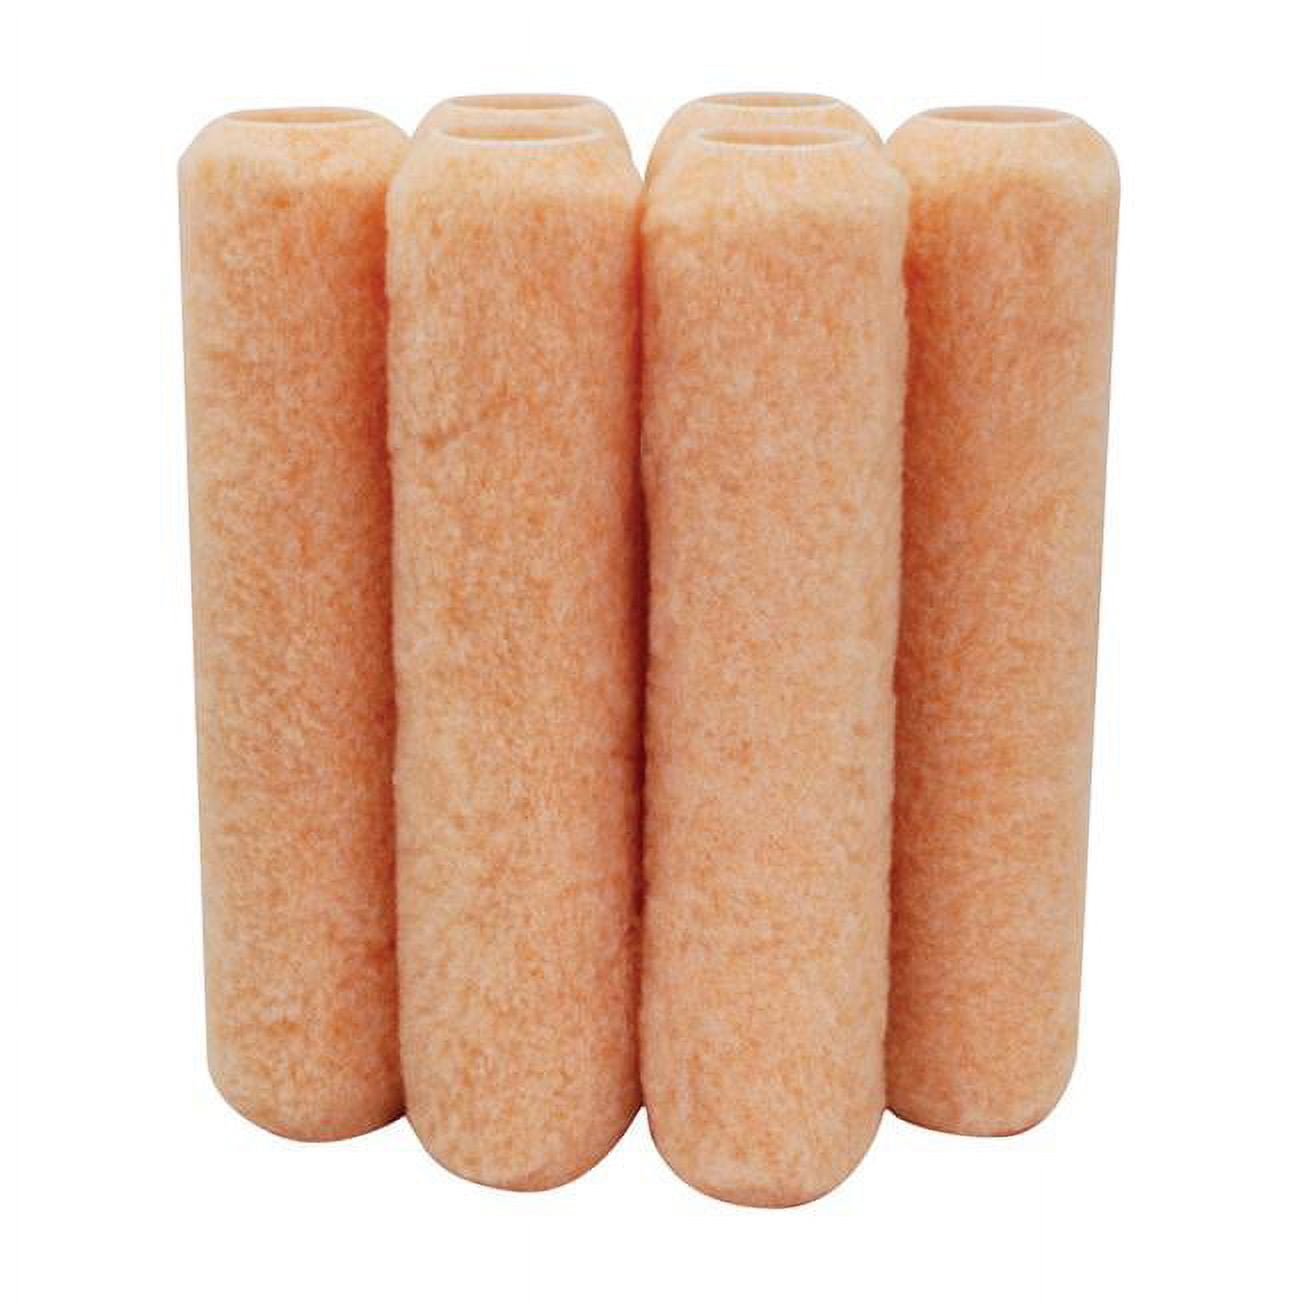 1806983 Paint-mate Polyester 9 X 9 In. Paint Roller Cover For Semi-smooth Surface, Melon - Pack Of 6